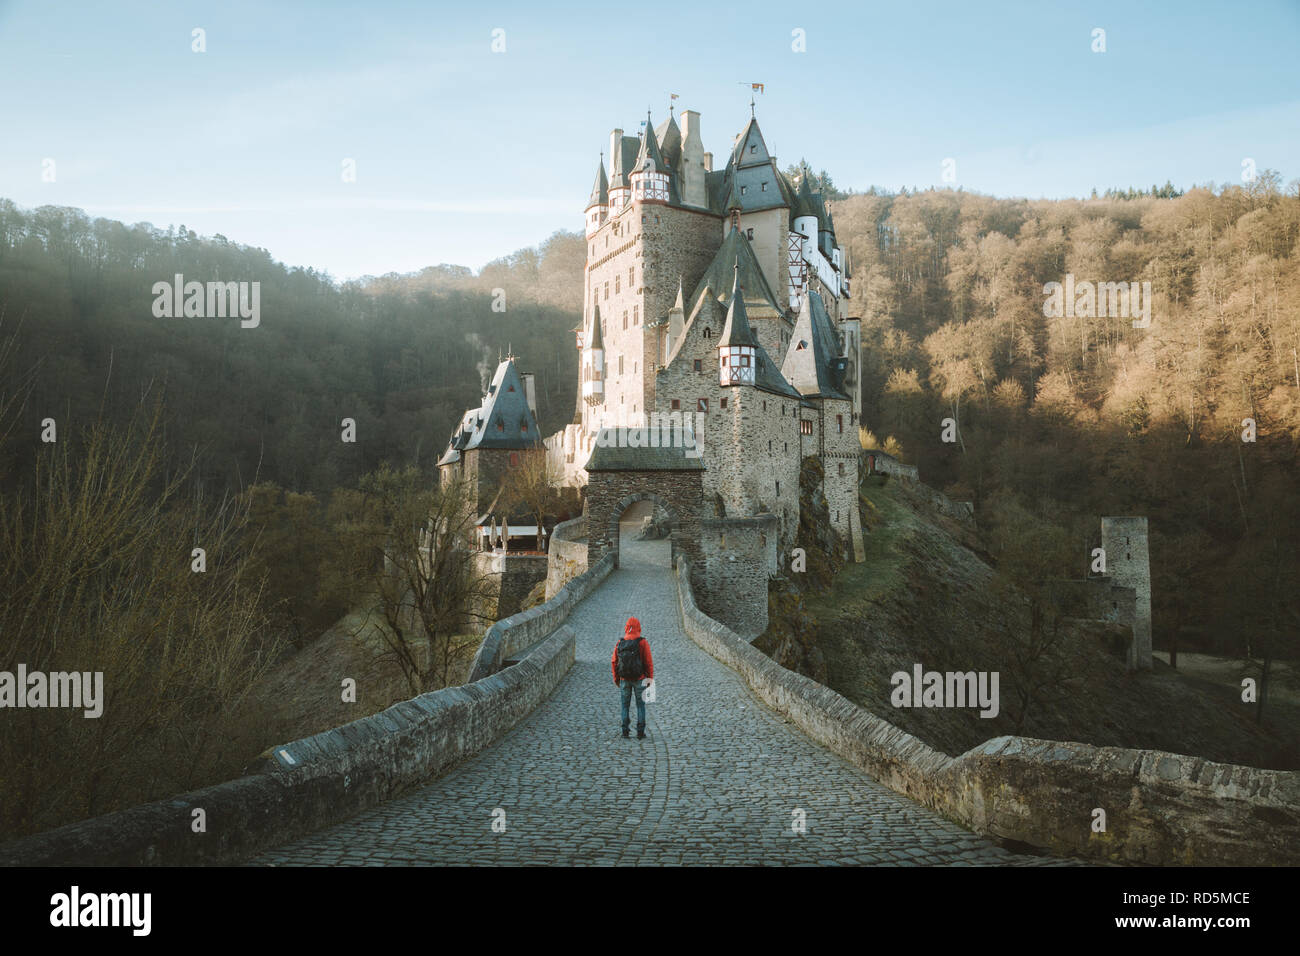 Panorama view of young explorer with backpack taking in the view at famous Eltz Castle at sunrise in fall, Rheinland-Pfalz, Germany Stock Photo